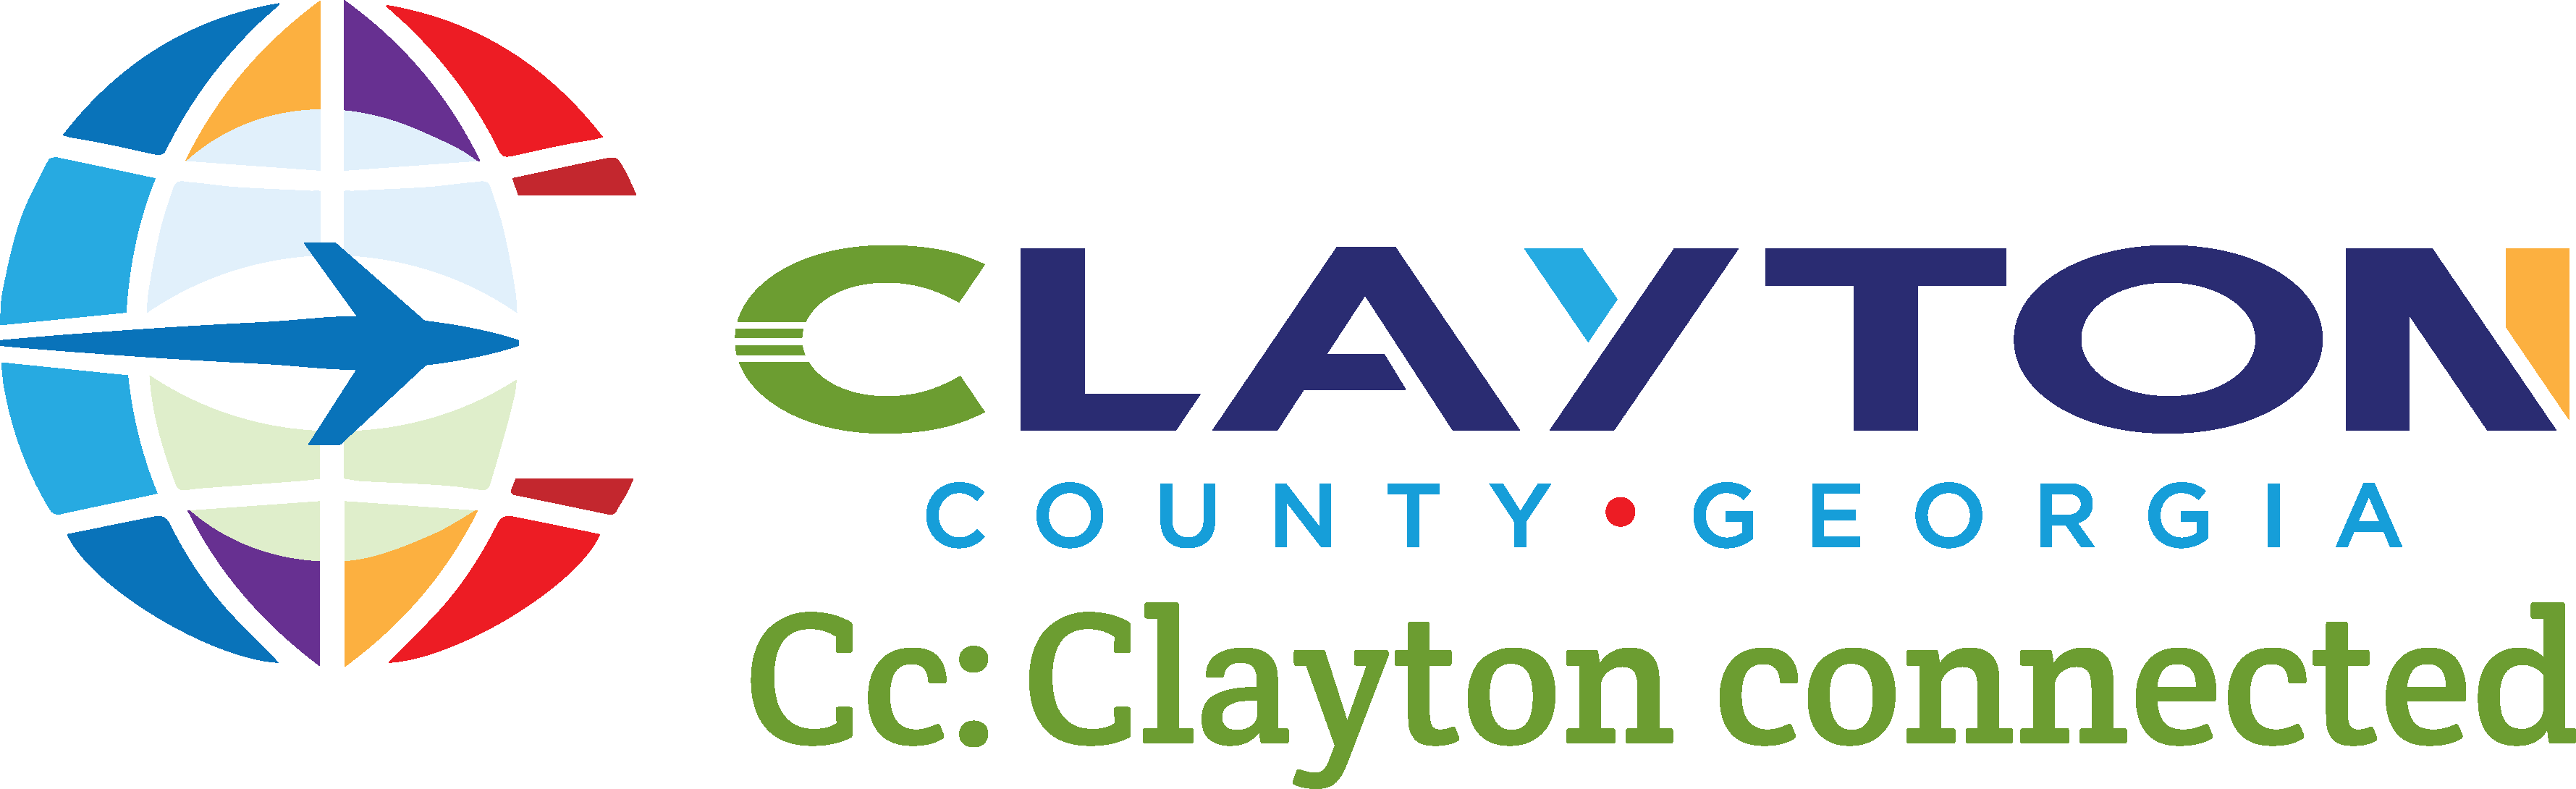 Clayton County, Georgia | COVID-19 Relief: Home, Mortgage, Utility Assistance